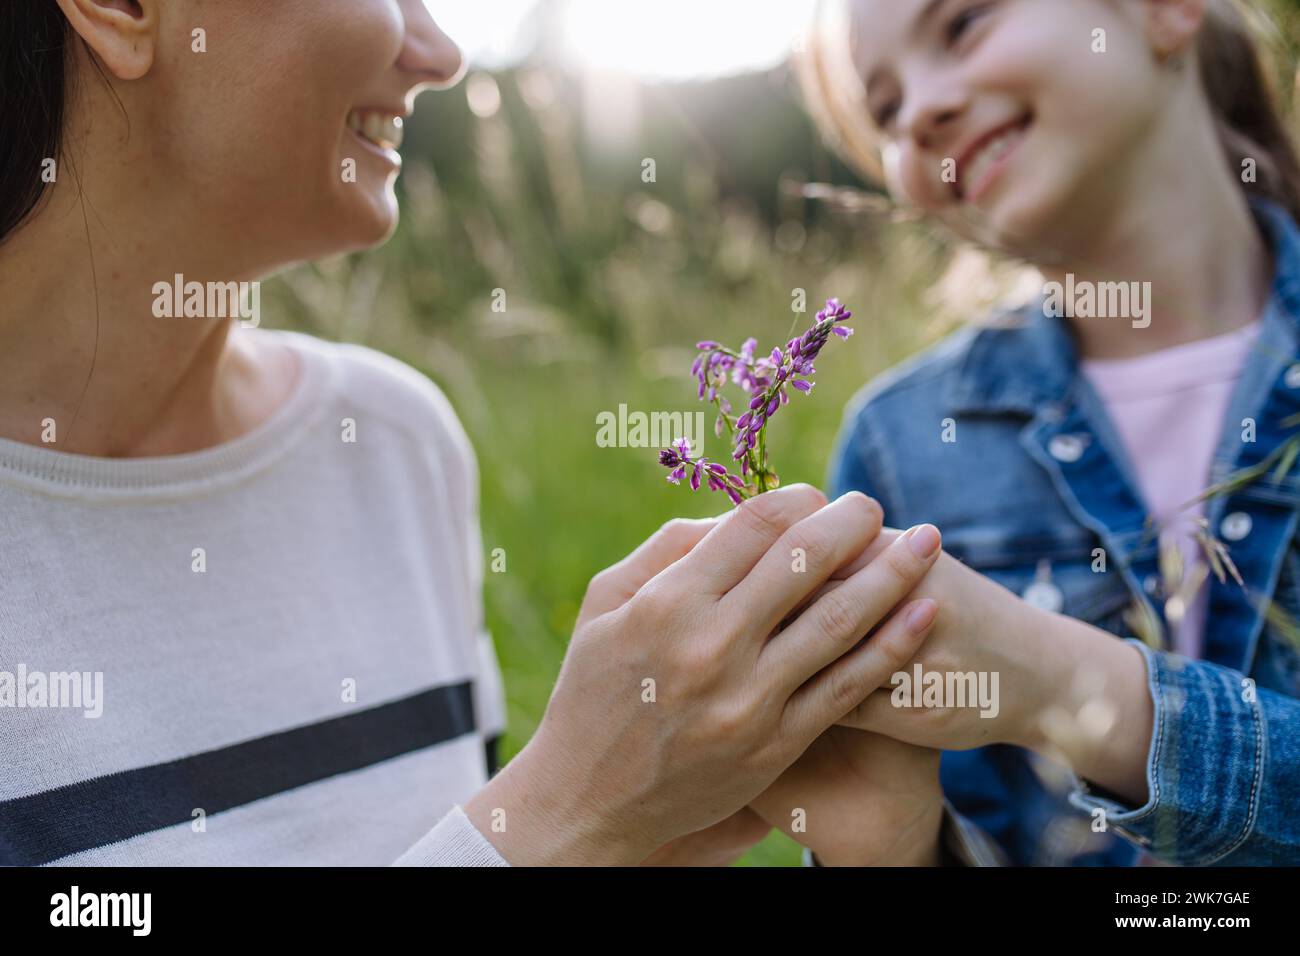 Daughter giving beautiful mother purple flower as gift. Concept of Mother's Day and maternal love. Stock Photo